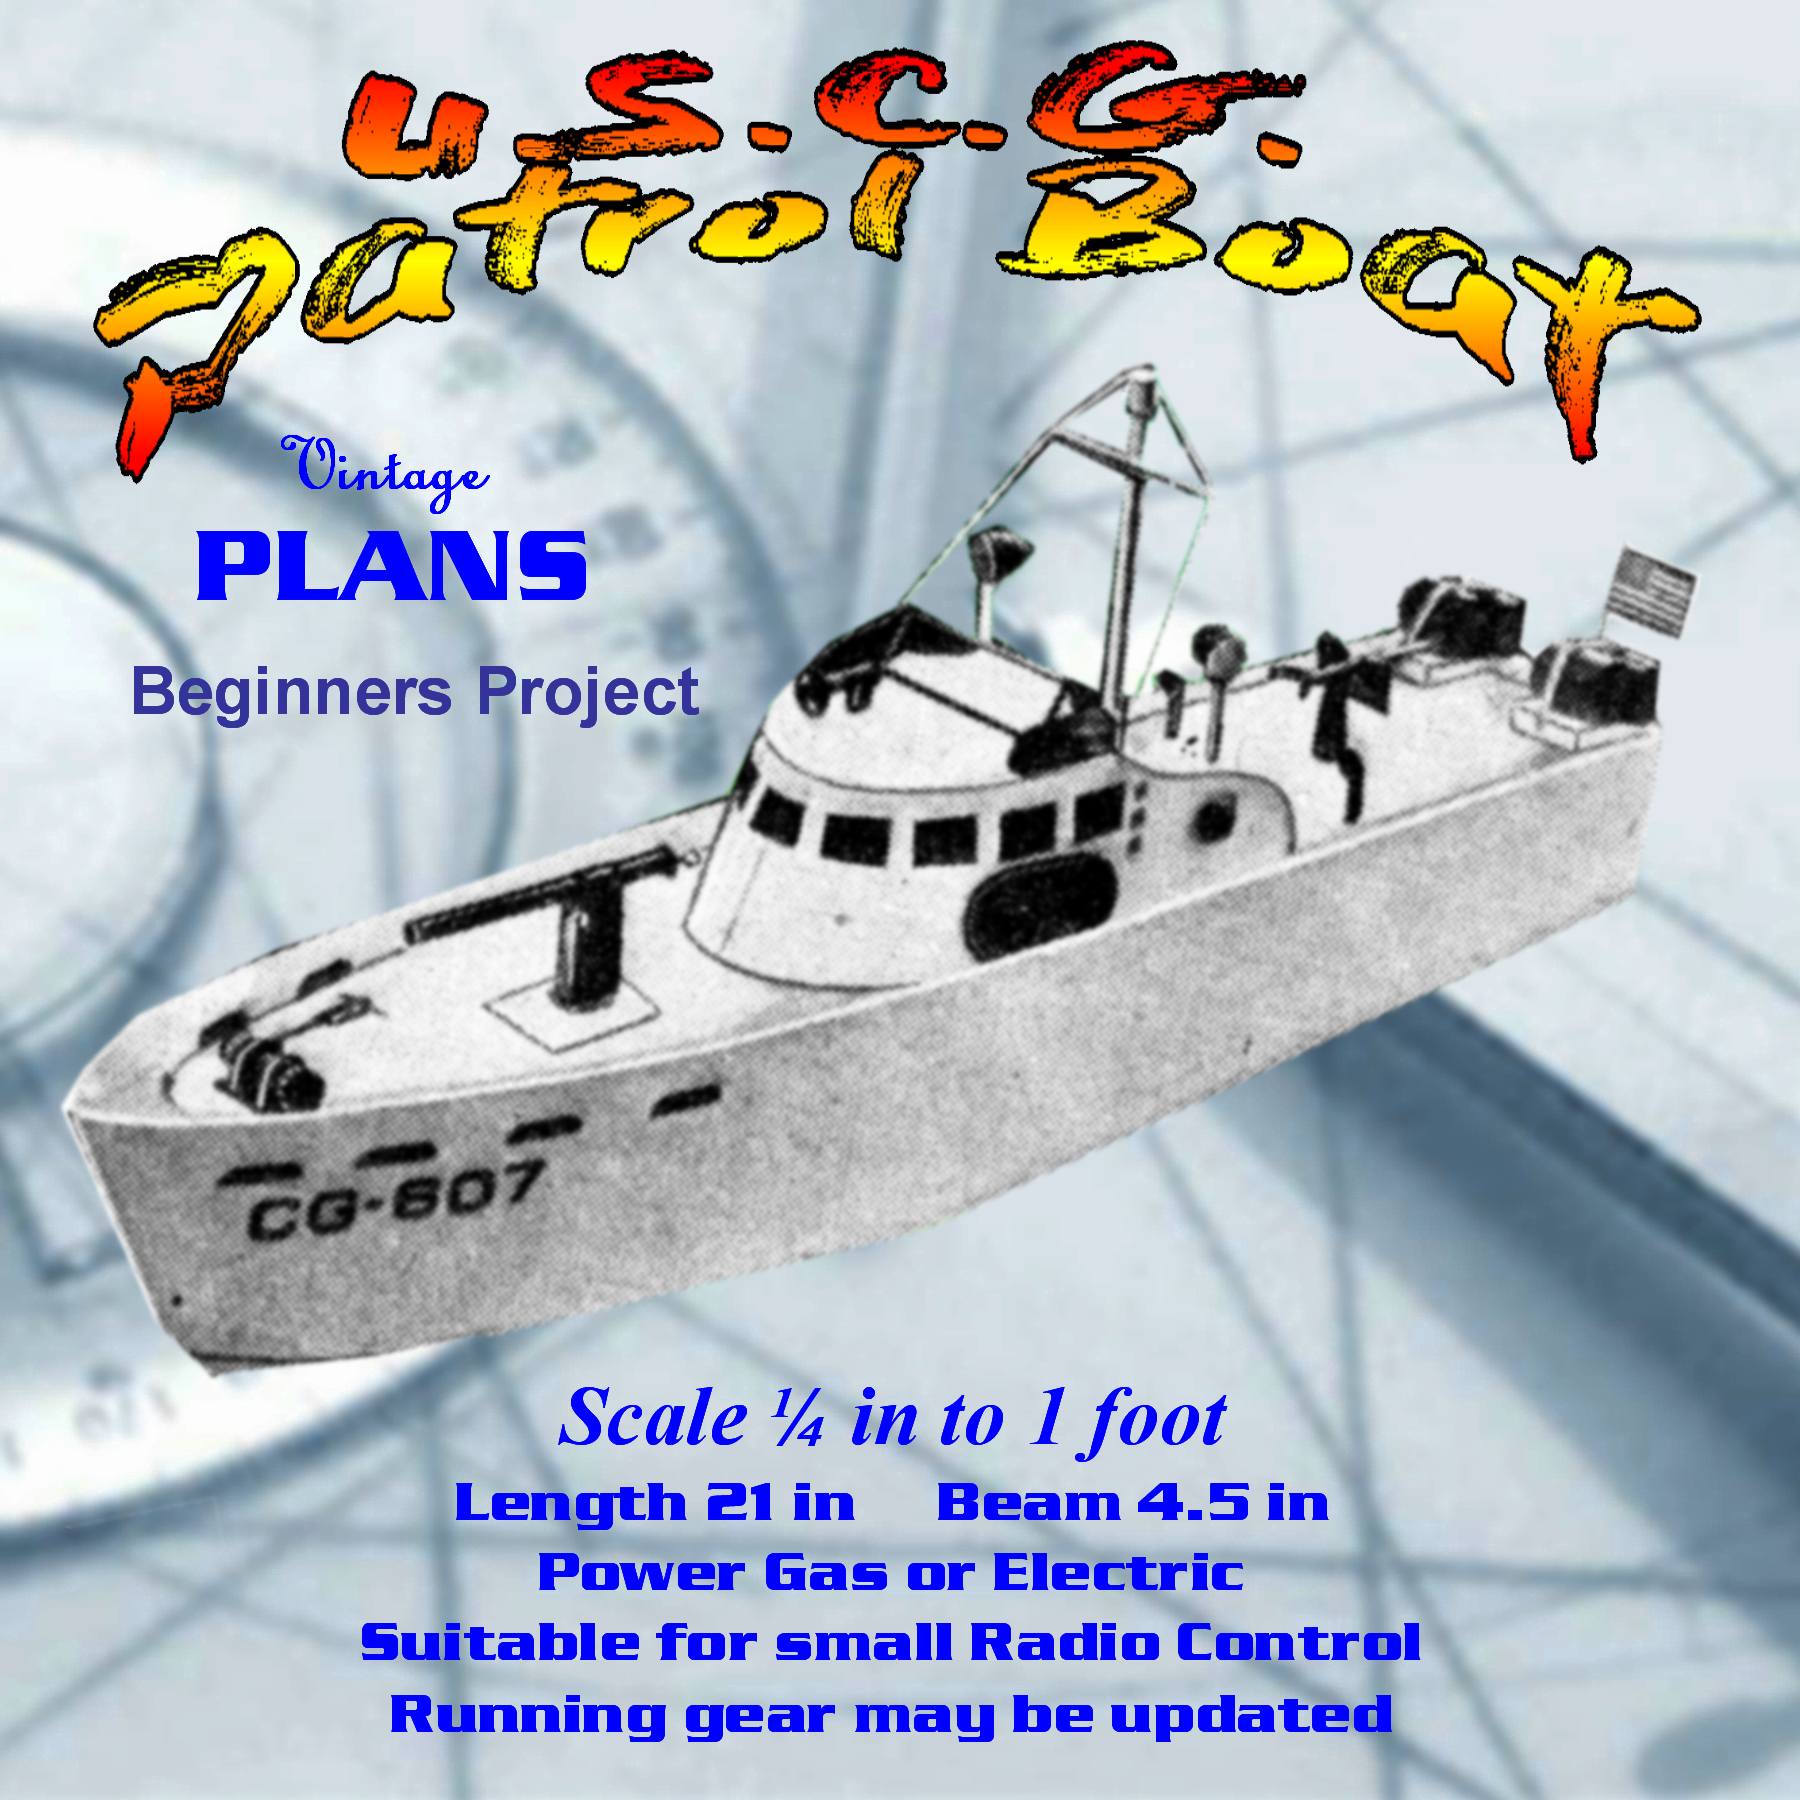 full size printed plan scale 1:48 83‑foot u.s.c.g. patrol boat project for beginners